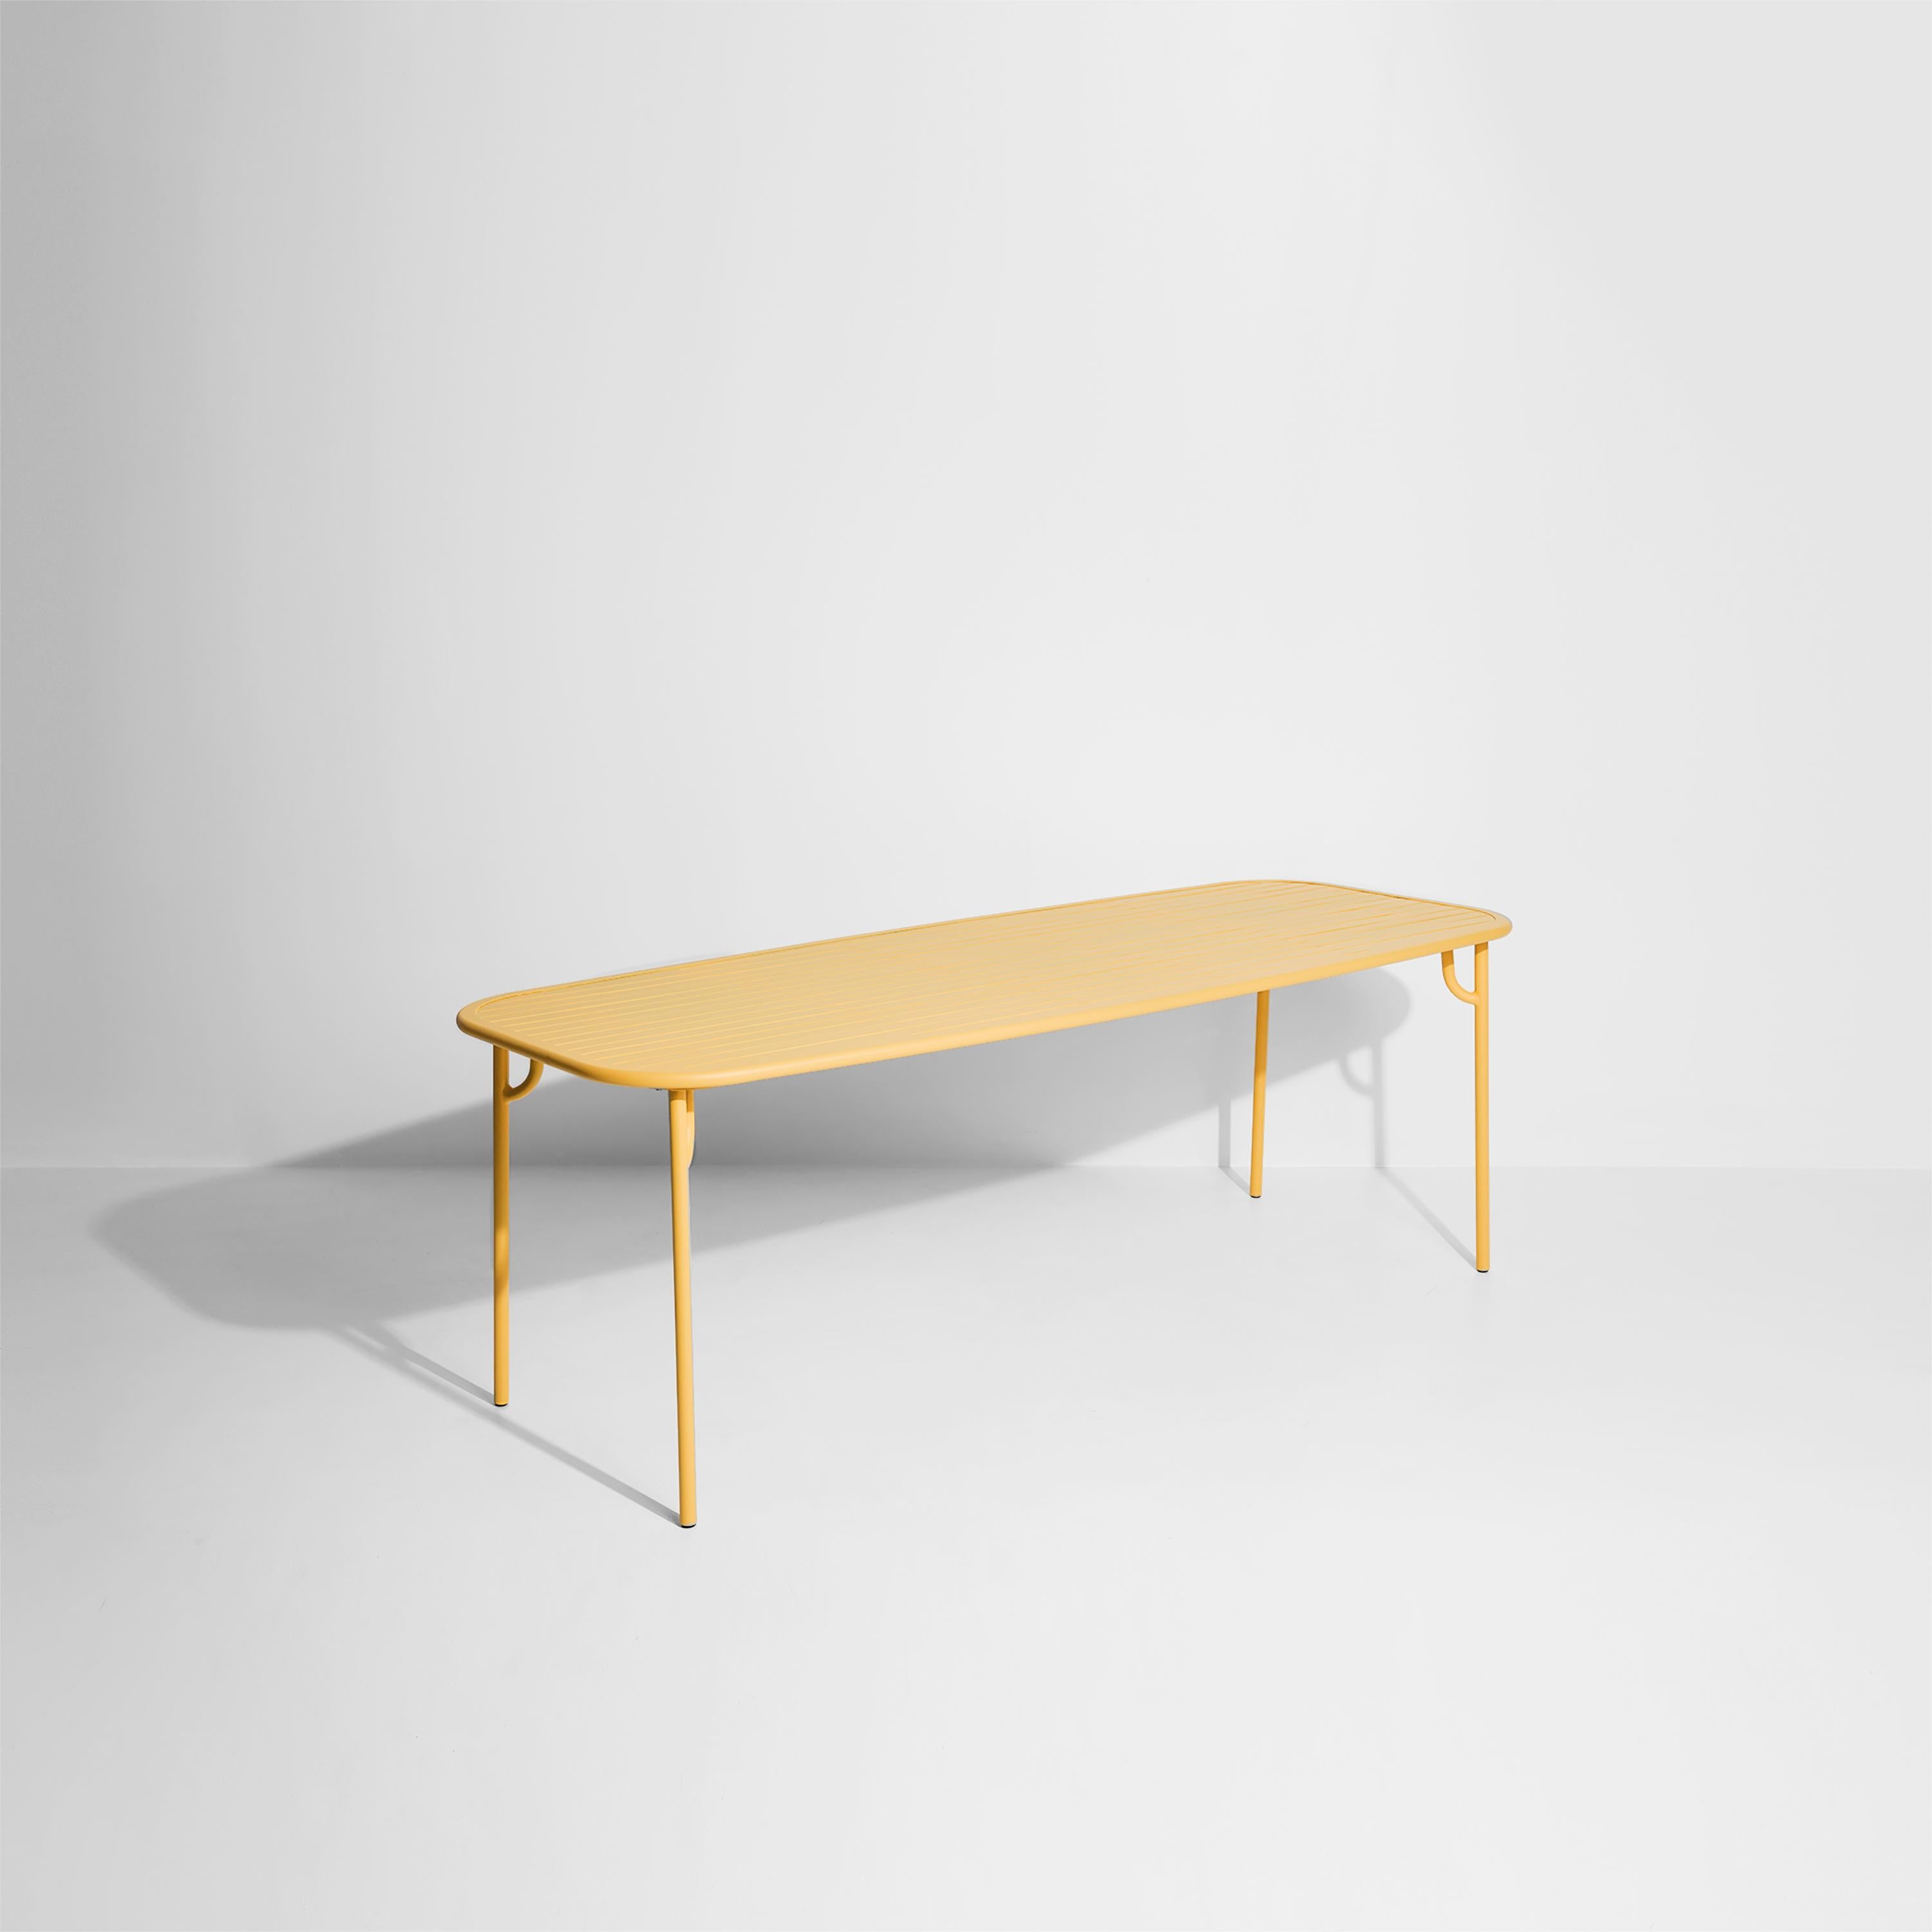 Petite Friture Week-End Large Rectangular Dining Table in Saffron Aluminium with Slats by Studio BrichetZiegler, 2017

The week-end collection is a full range of outdoor furniture, in aluminium grained epoxy paint, matt finish, that includes 18